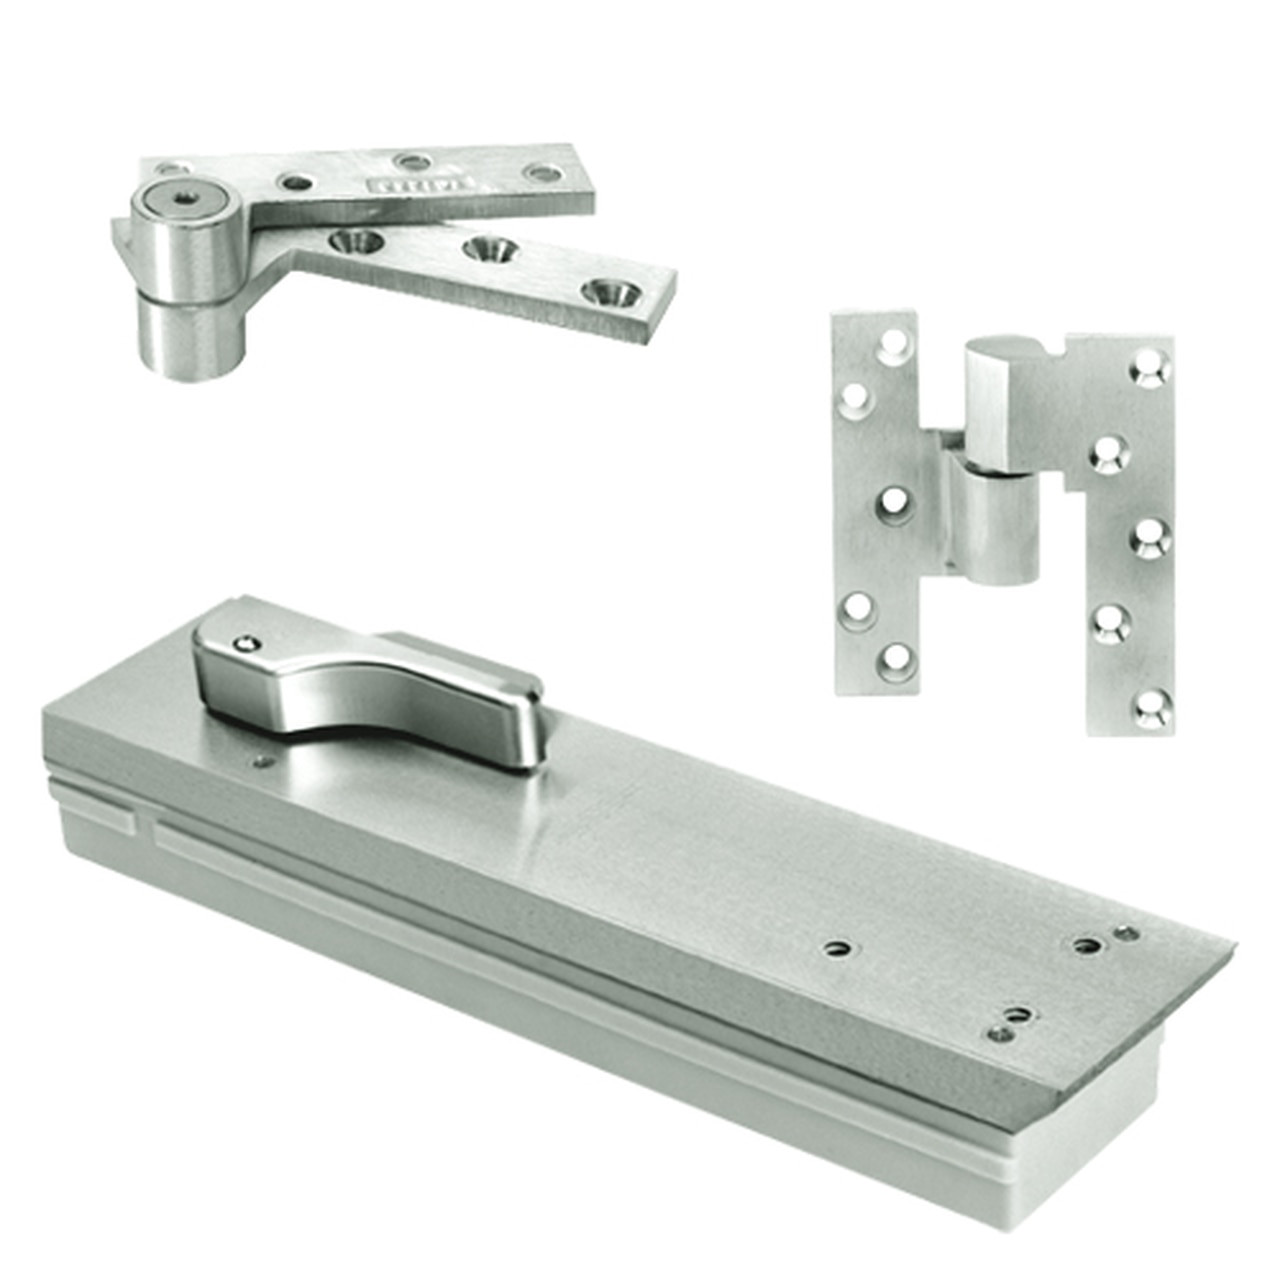 FQ5104NBC-LFP-LCC-RH-618 Rixson Q51 Series Fire Rated 3/4" Offset Hung Shallow Depth Floor Closers in Bright Nickel Finish